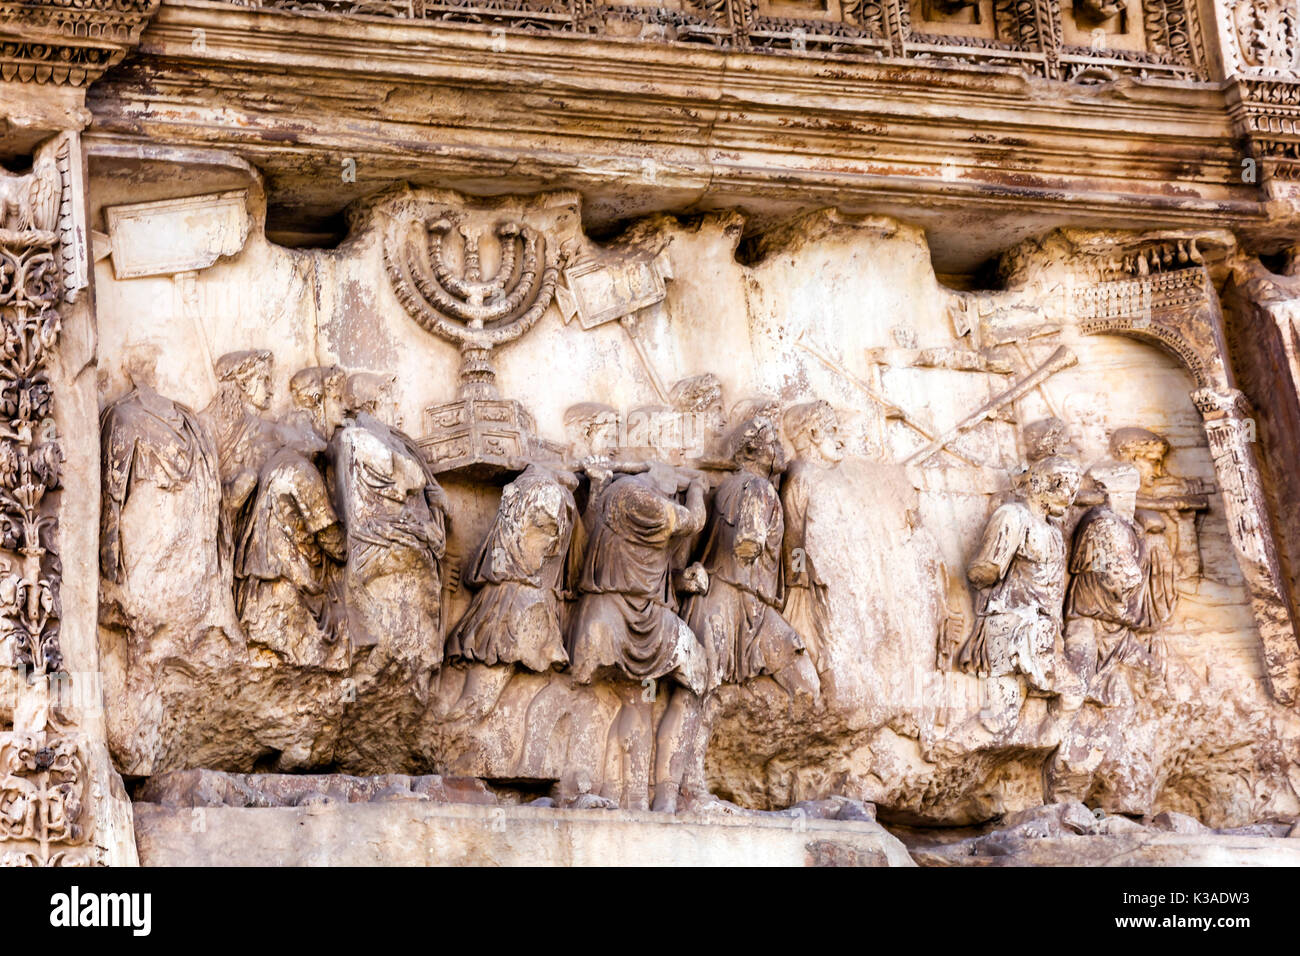 Titus Arch Roman Loot Menorah Temple Jerusalem Forum Rome Italy.  Stone arch was erected in 81 AD in honor of Emperor Vespasian and his son Titus for  Stock Photo